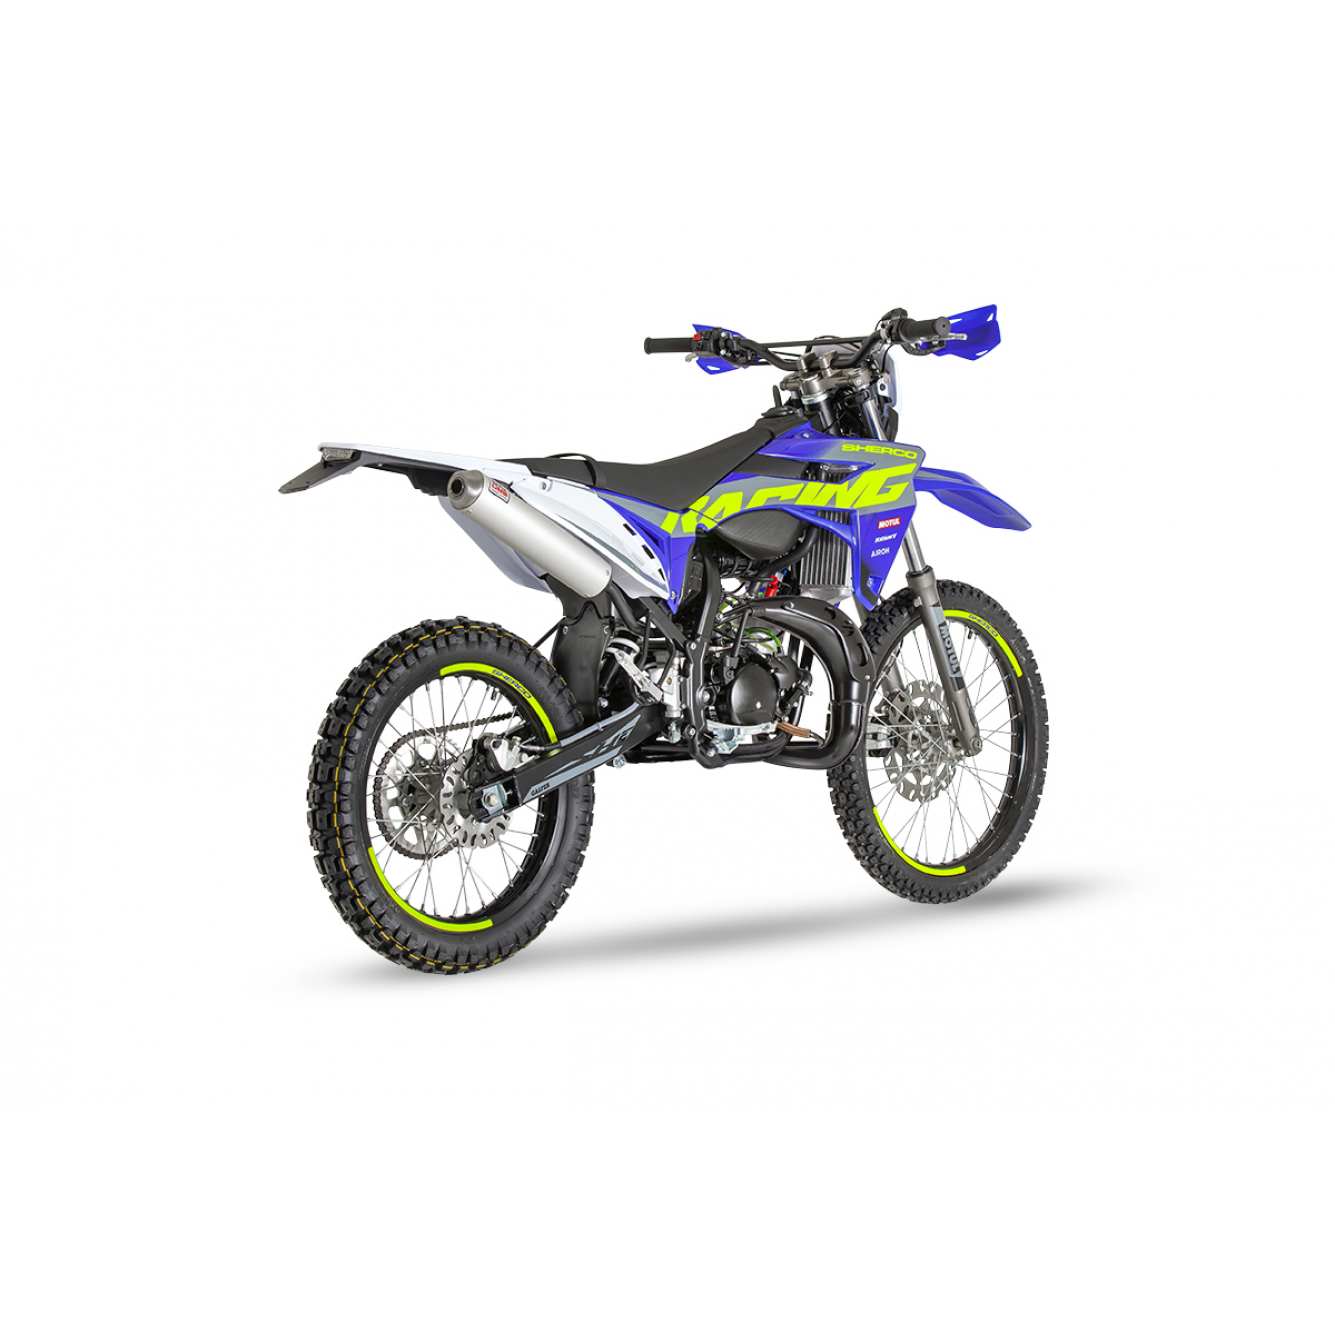 Sherco | Brommer 50 SE-R Factory